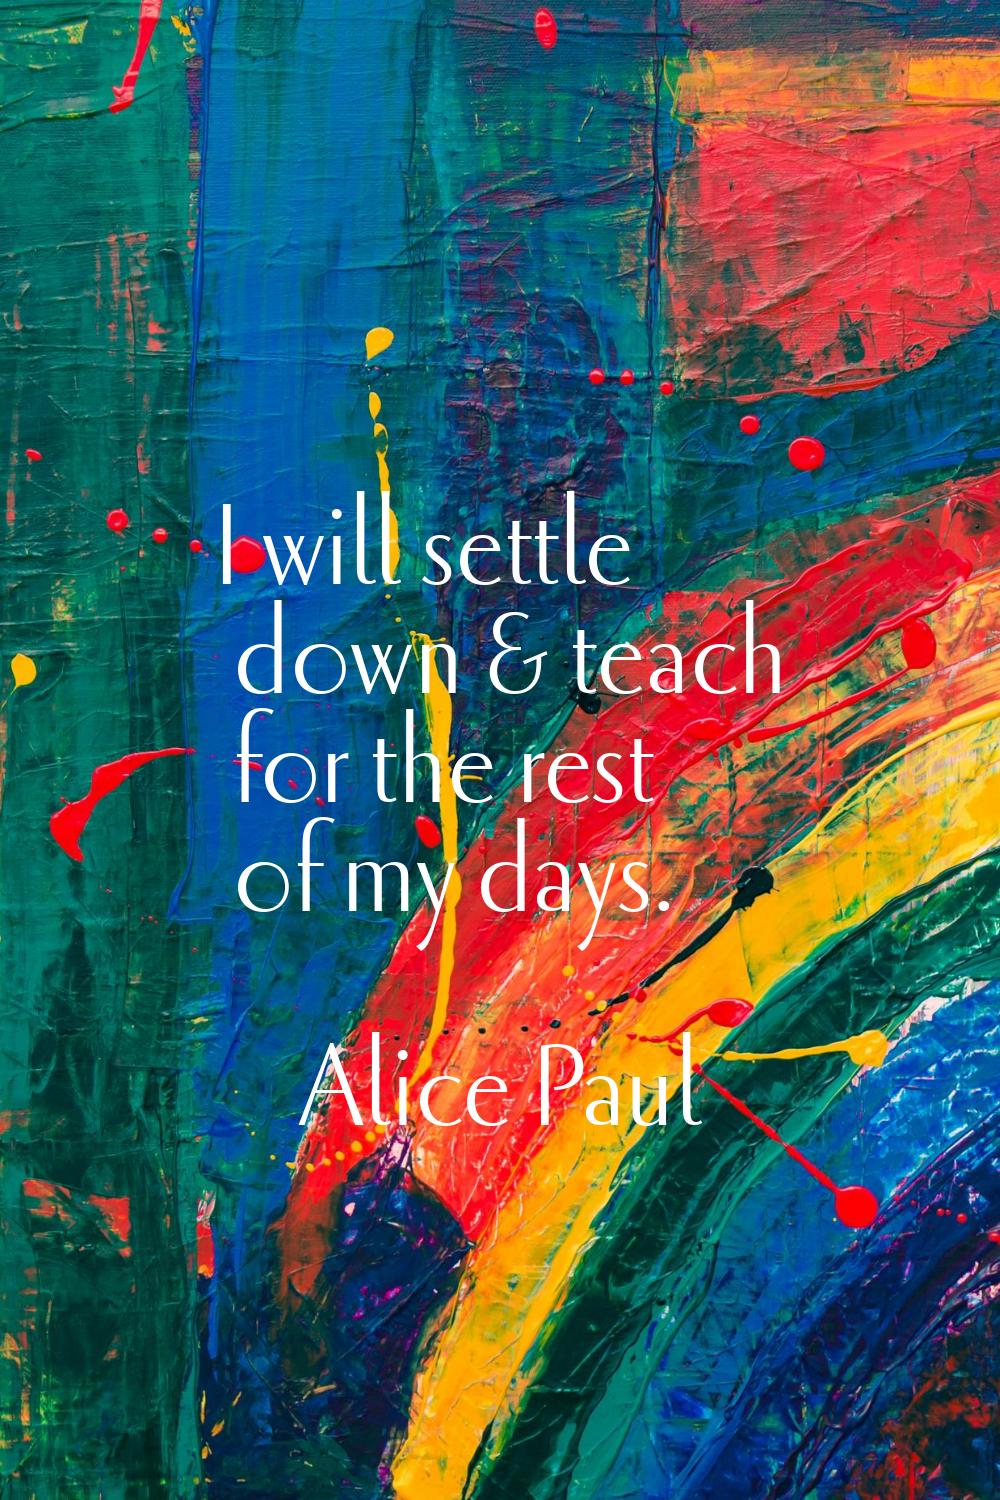 I will settle down & teach for the rest of my days.